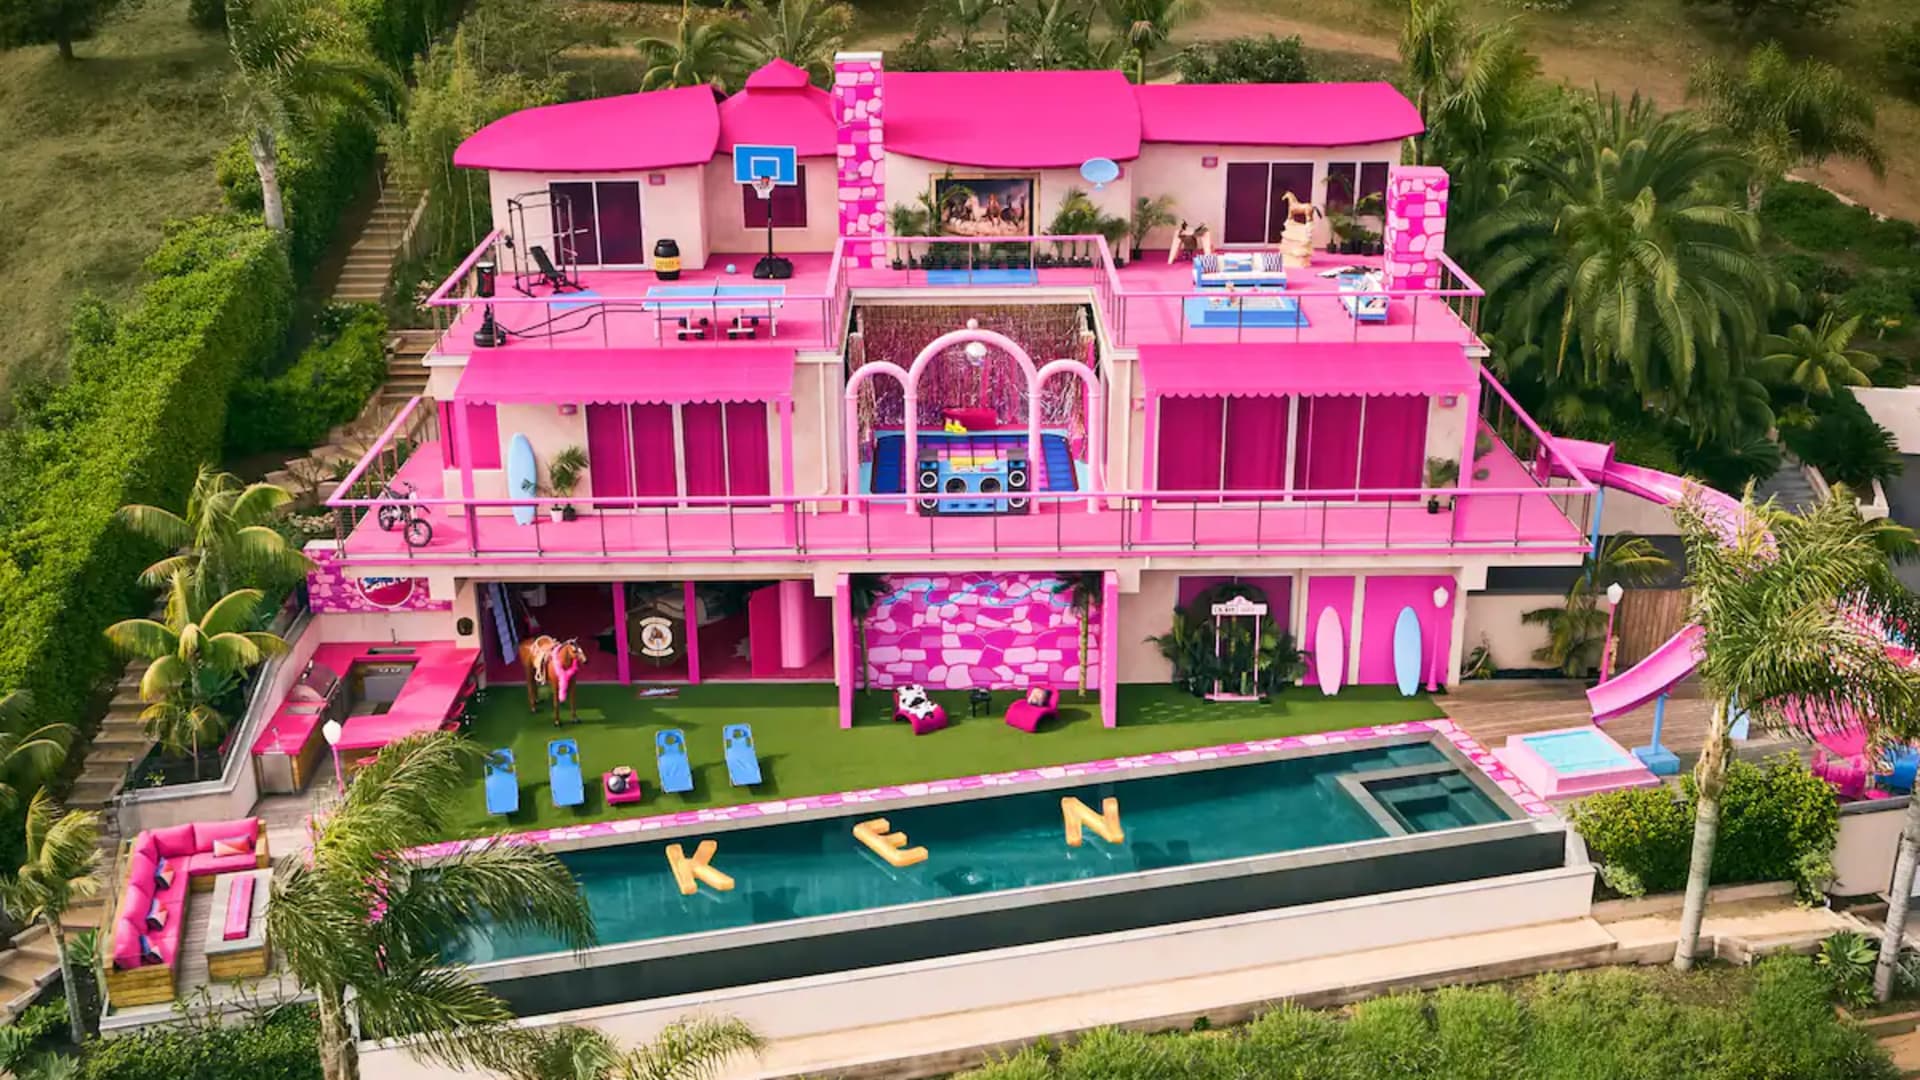 Airbnb is offering a free stay at Barbie's Malibu Dreamhouse—here's how to book